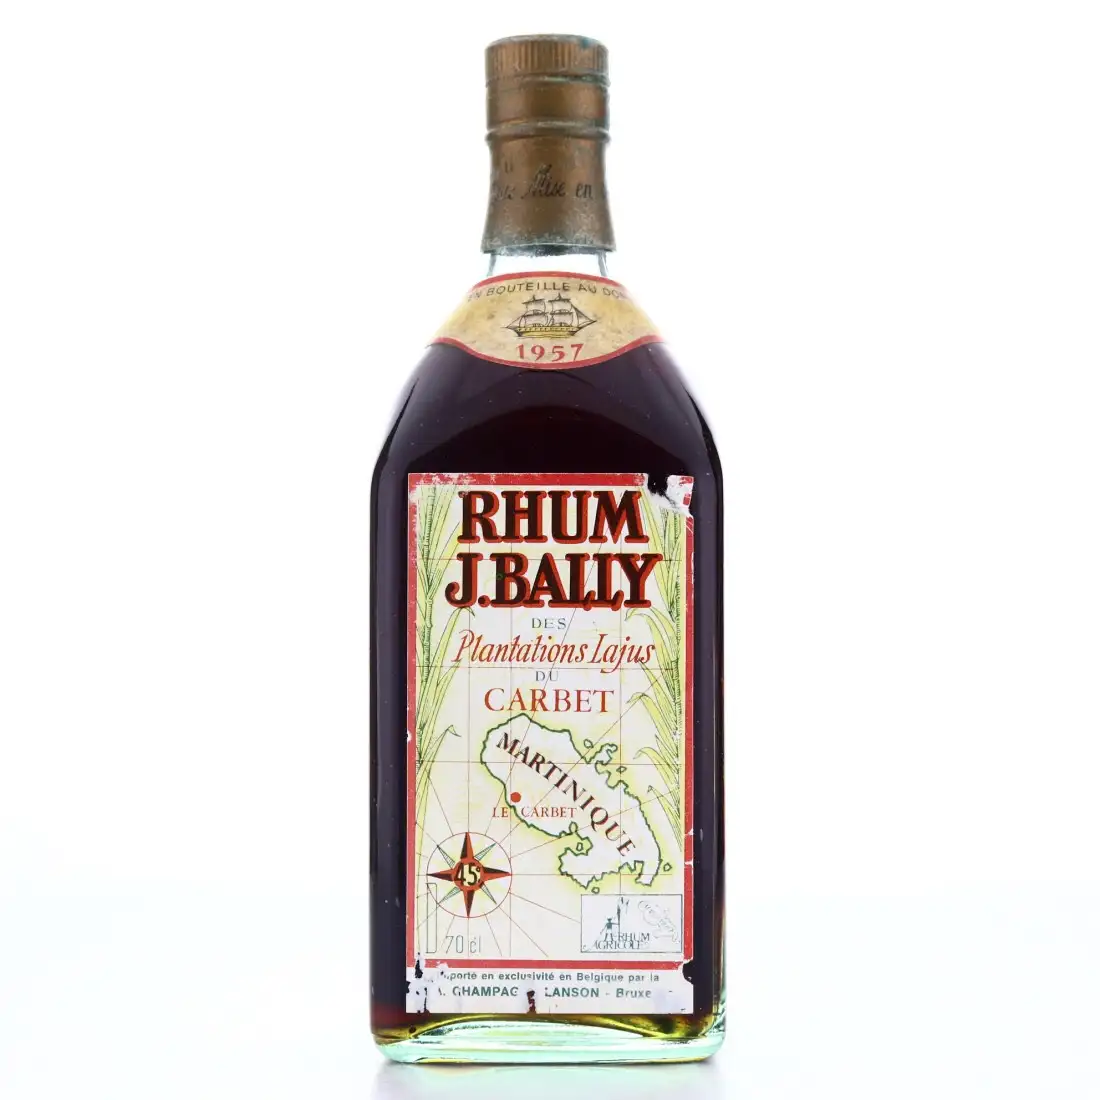 Image of the front of the bottle of the rum 1957